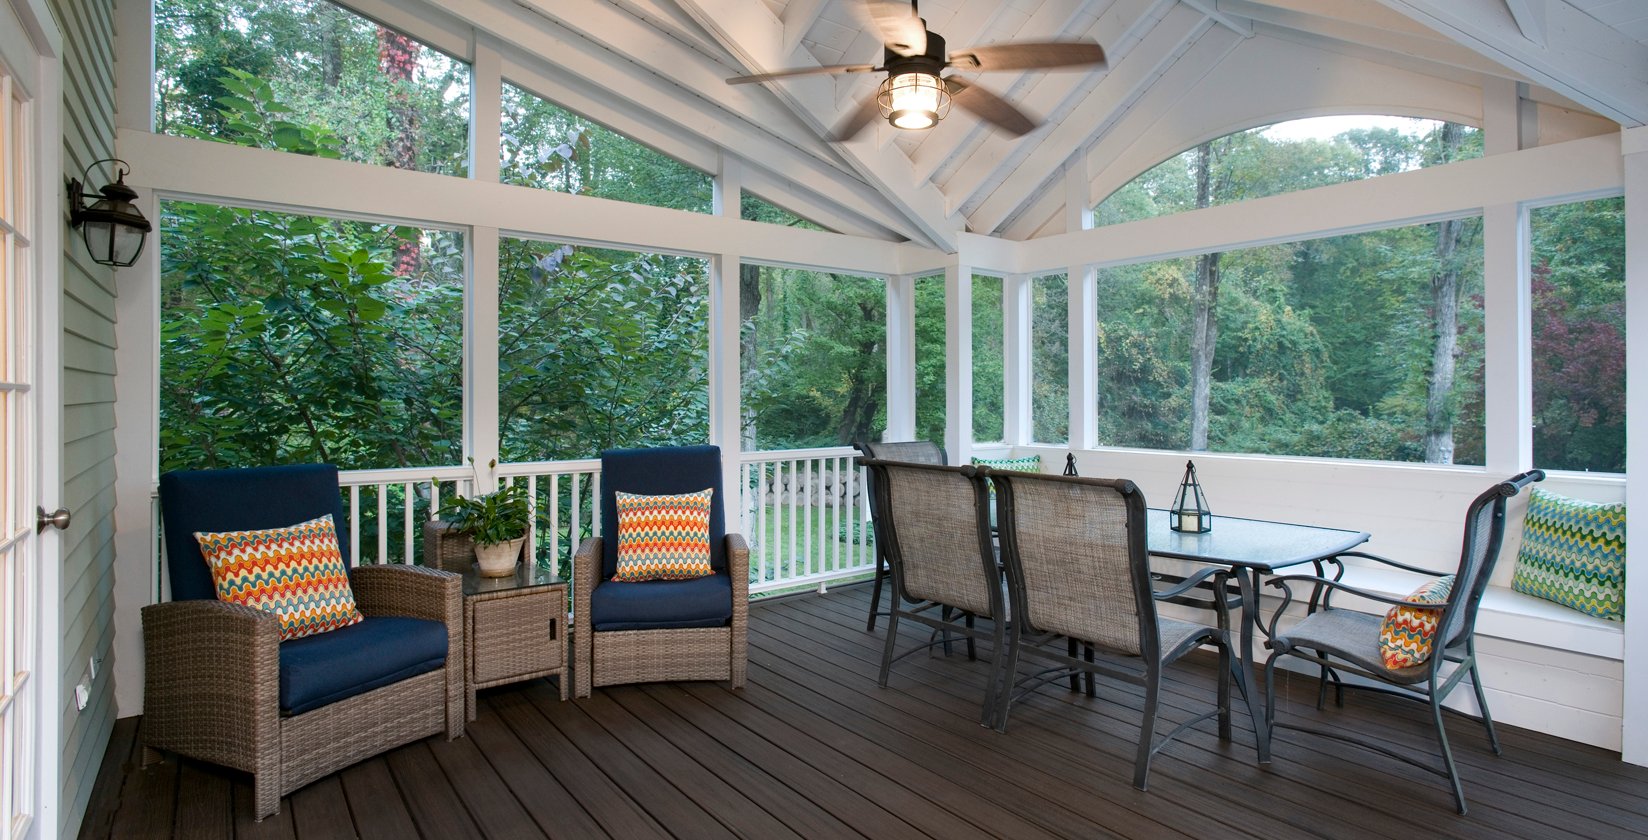 A Screened Porch: the Best of Both Worlds